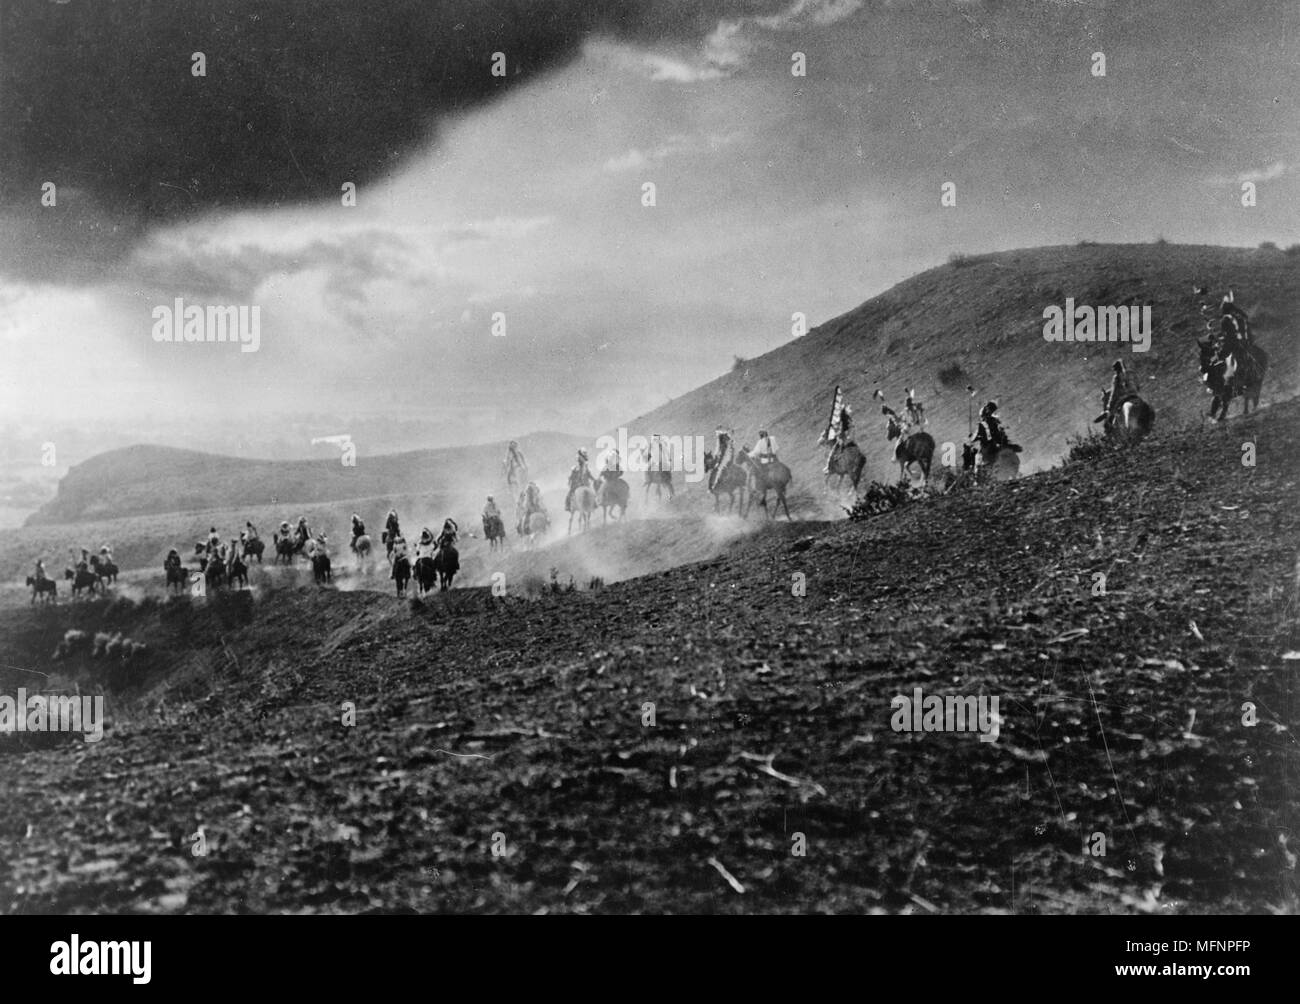 Group of Native Americans in war dress riding over hills in staged re-enactment, 1913. Photograph by by Joseph Kossuth Dixon Stock Photo